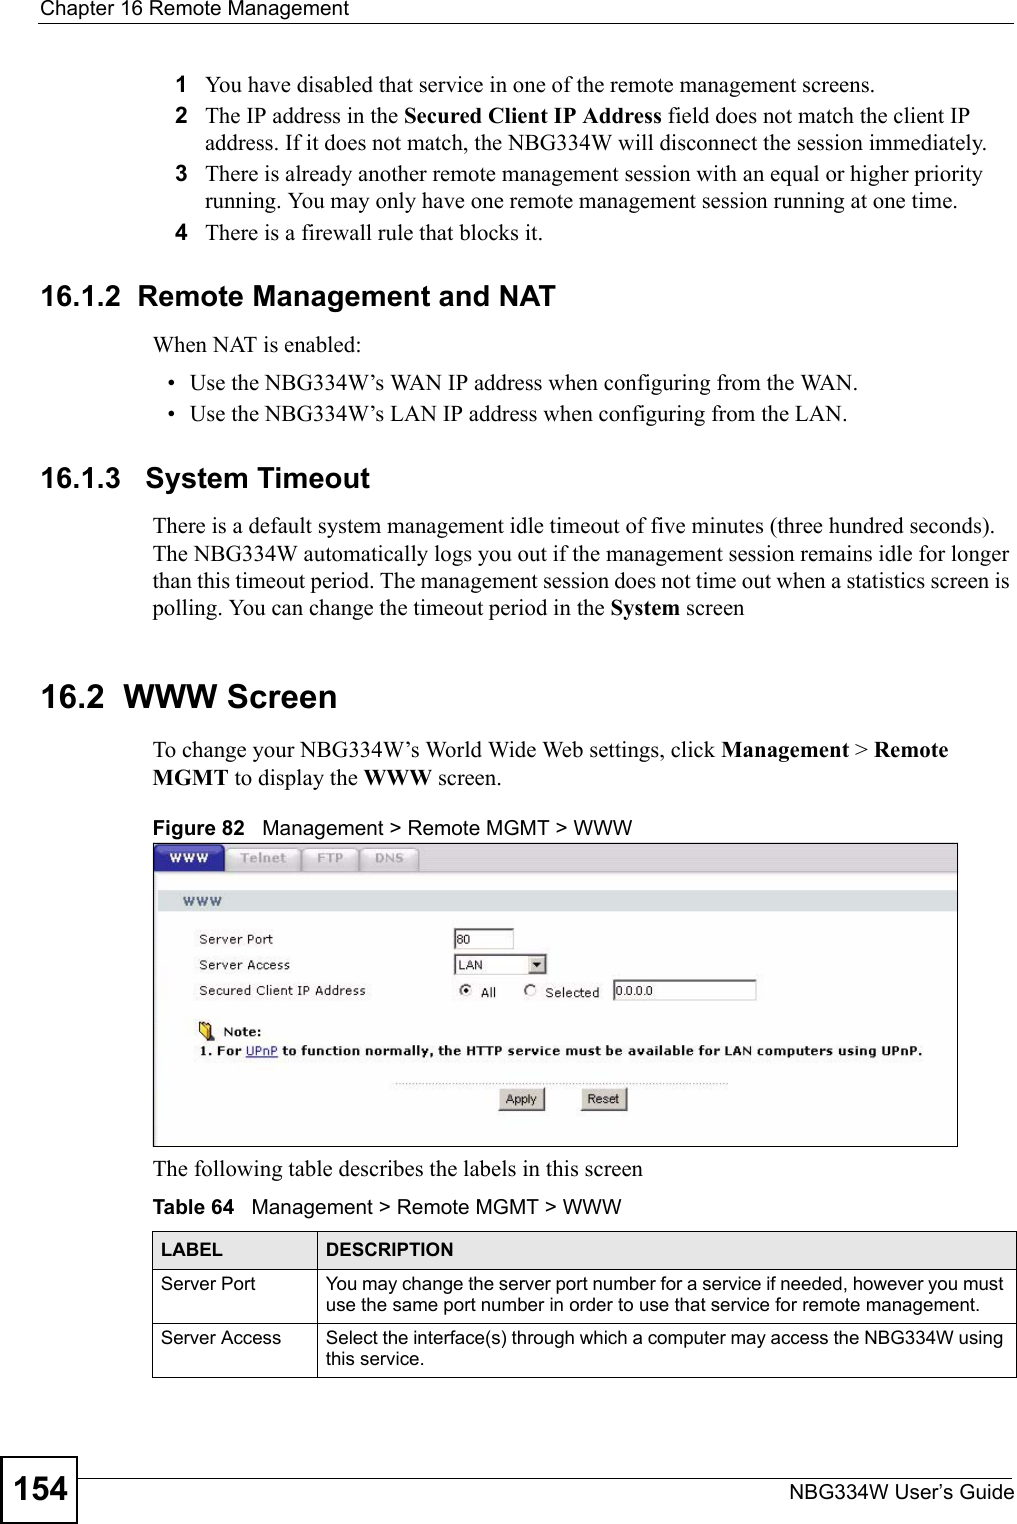 Chapter 16 Remote ManagementNBG334W User’s Guide1541You have disabled that service in one of the remote management screens.2The IP address in the Secured Client IP Address field does not match the client IP address. If it does not match, the NBG334W will disconnect the session immediately.3There is already another remote management session with an equal or higher priority running. You may only have one remote management session running at one time.4There is a firewall rule that blocks it.16.1.2  Remote Management and NATWhen NAT is enabled:• Use the NBG334W’s WAN IP address when configuring from the WAN. • Use the NBG334W’s LAN IP address when configuring from the LAN.16.1.3   System TimeoutThere is a default system management idle timeout of five minutes (three hundred seconds). The NBG334W automatically logs you out if the management session remains idle for longer than this timeout period. The management session does not time out when a statistics screen is polling. You can change the timeout period in the System screen16.2  WWW Screen    To change your NBG334W’s World Wide Web settings, click Management &gt; Remote MGMT to display the WWW screen.Figure 82   Management &gt; Remote MGMT &gt; WWW The following table describes the labels in this screenTable 64   Management &gt; Remote MGMT &gt; WWW LABEL DESCRIPTIONServer Port You may change the server port number for a service if needed, however you must use the same port number in order to use that service for remote management.Server Access Select the interface(s) through which a computer may access the NBG334W using this service.